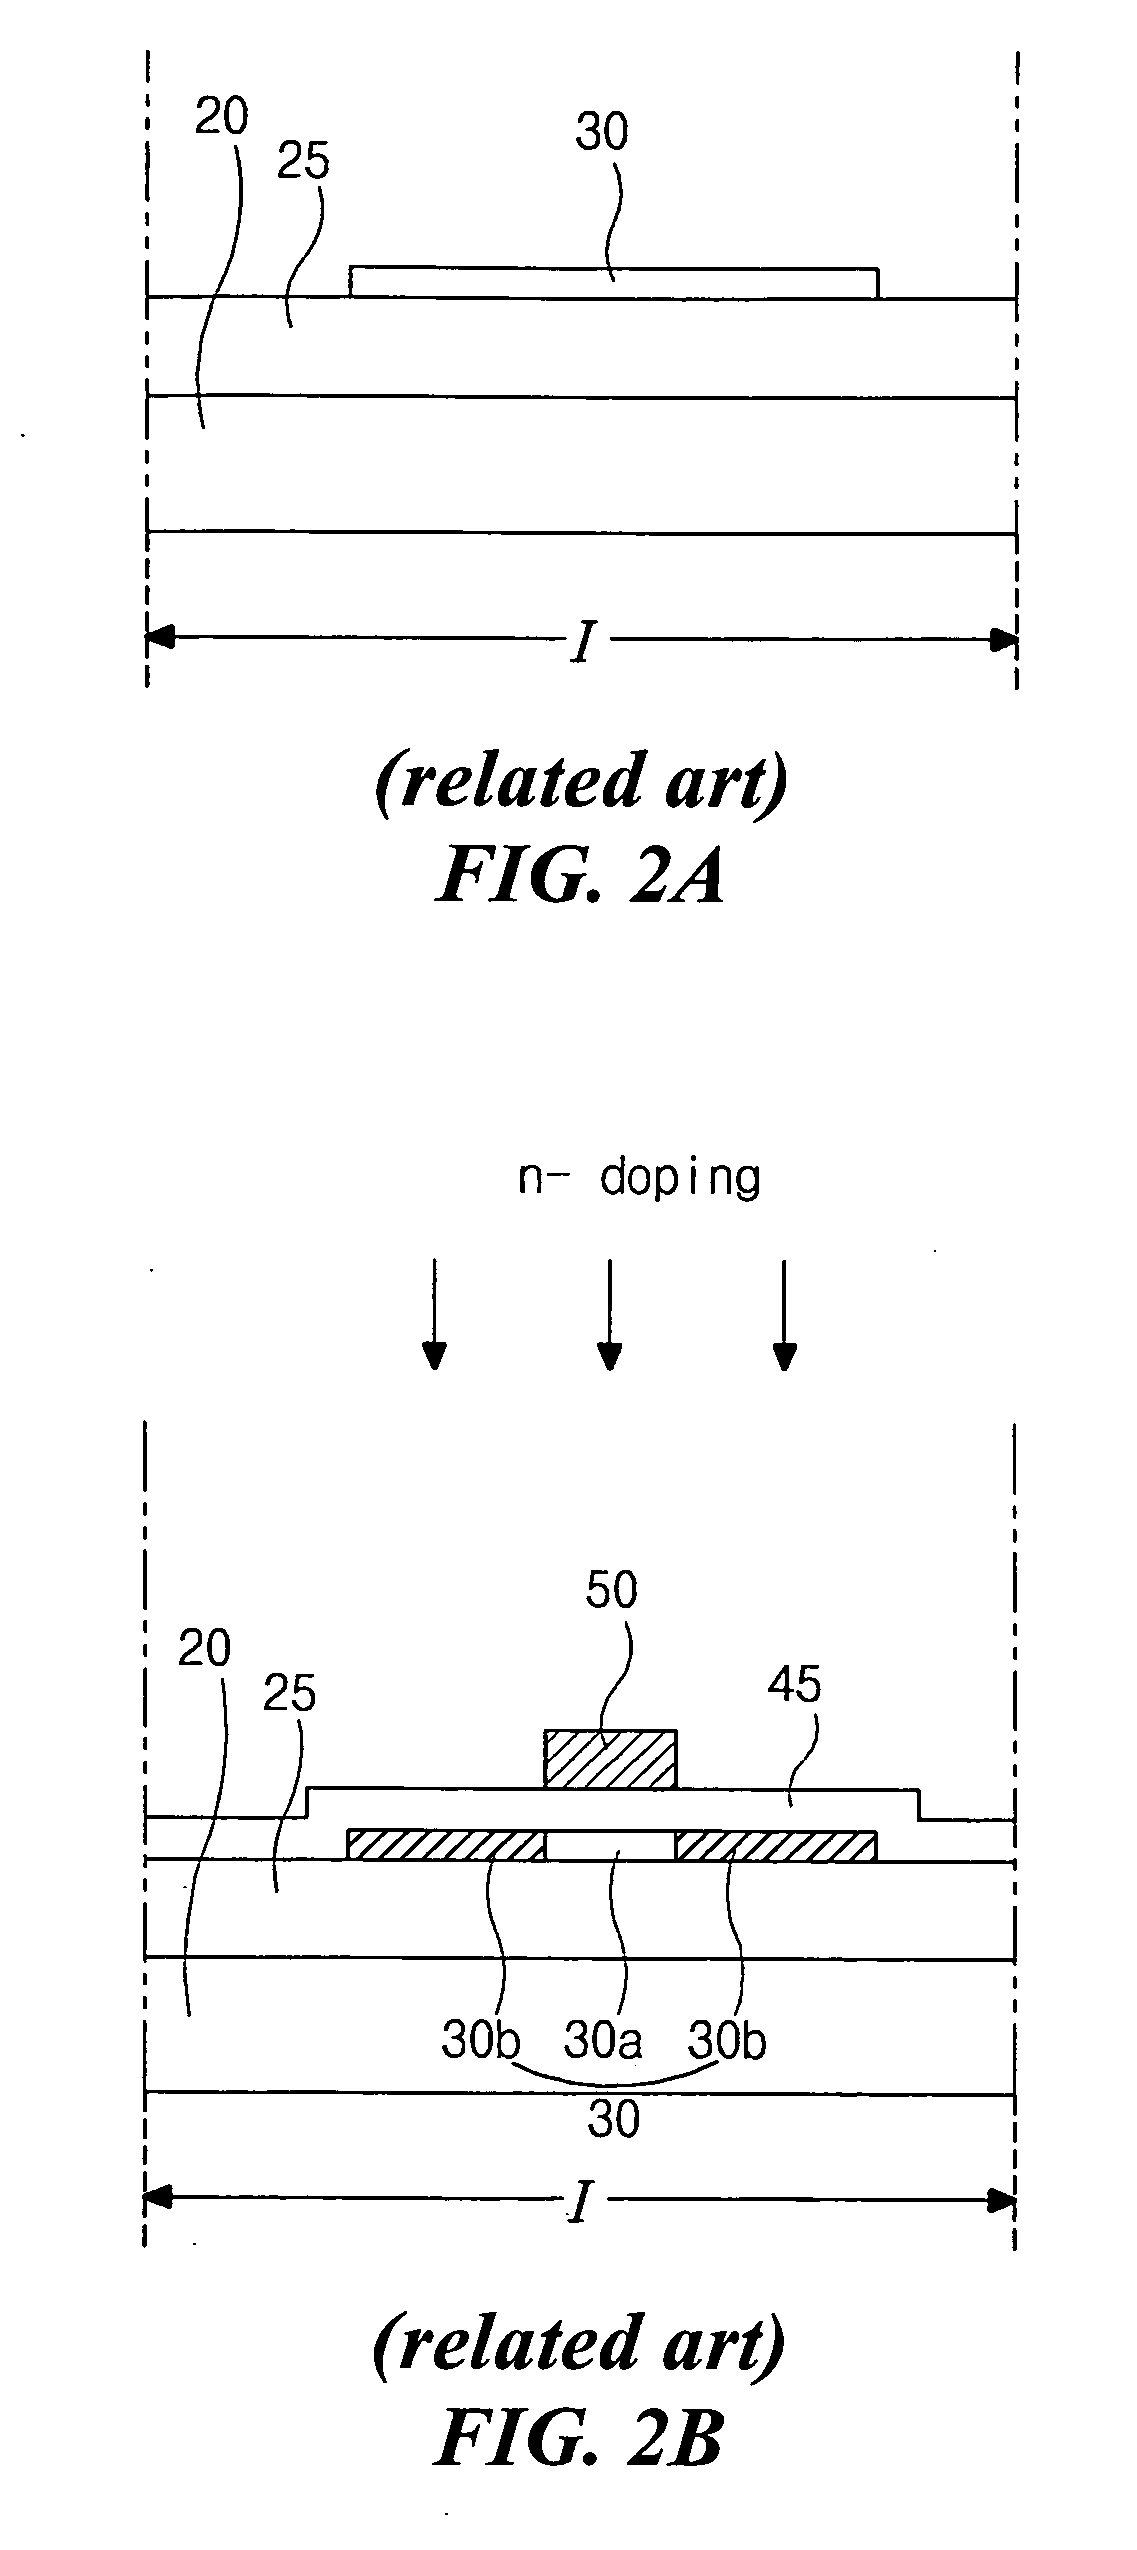 Liquid crystal display device including driving circuit and method of fabricating the same